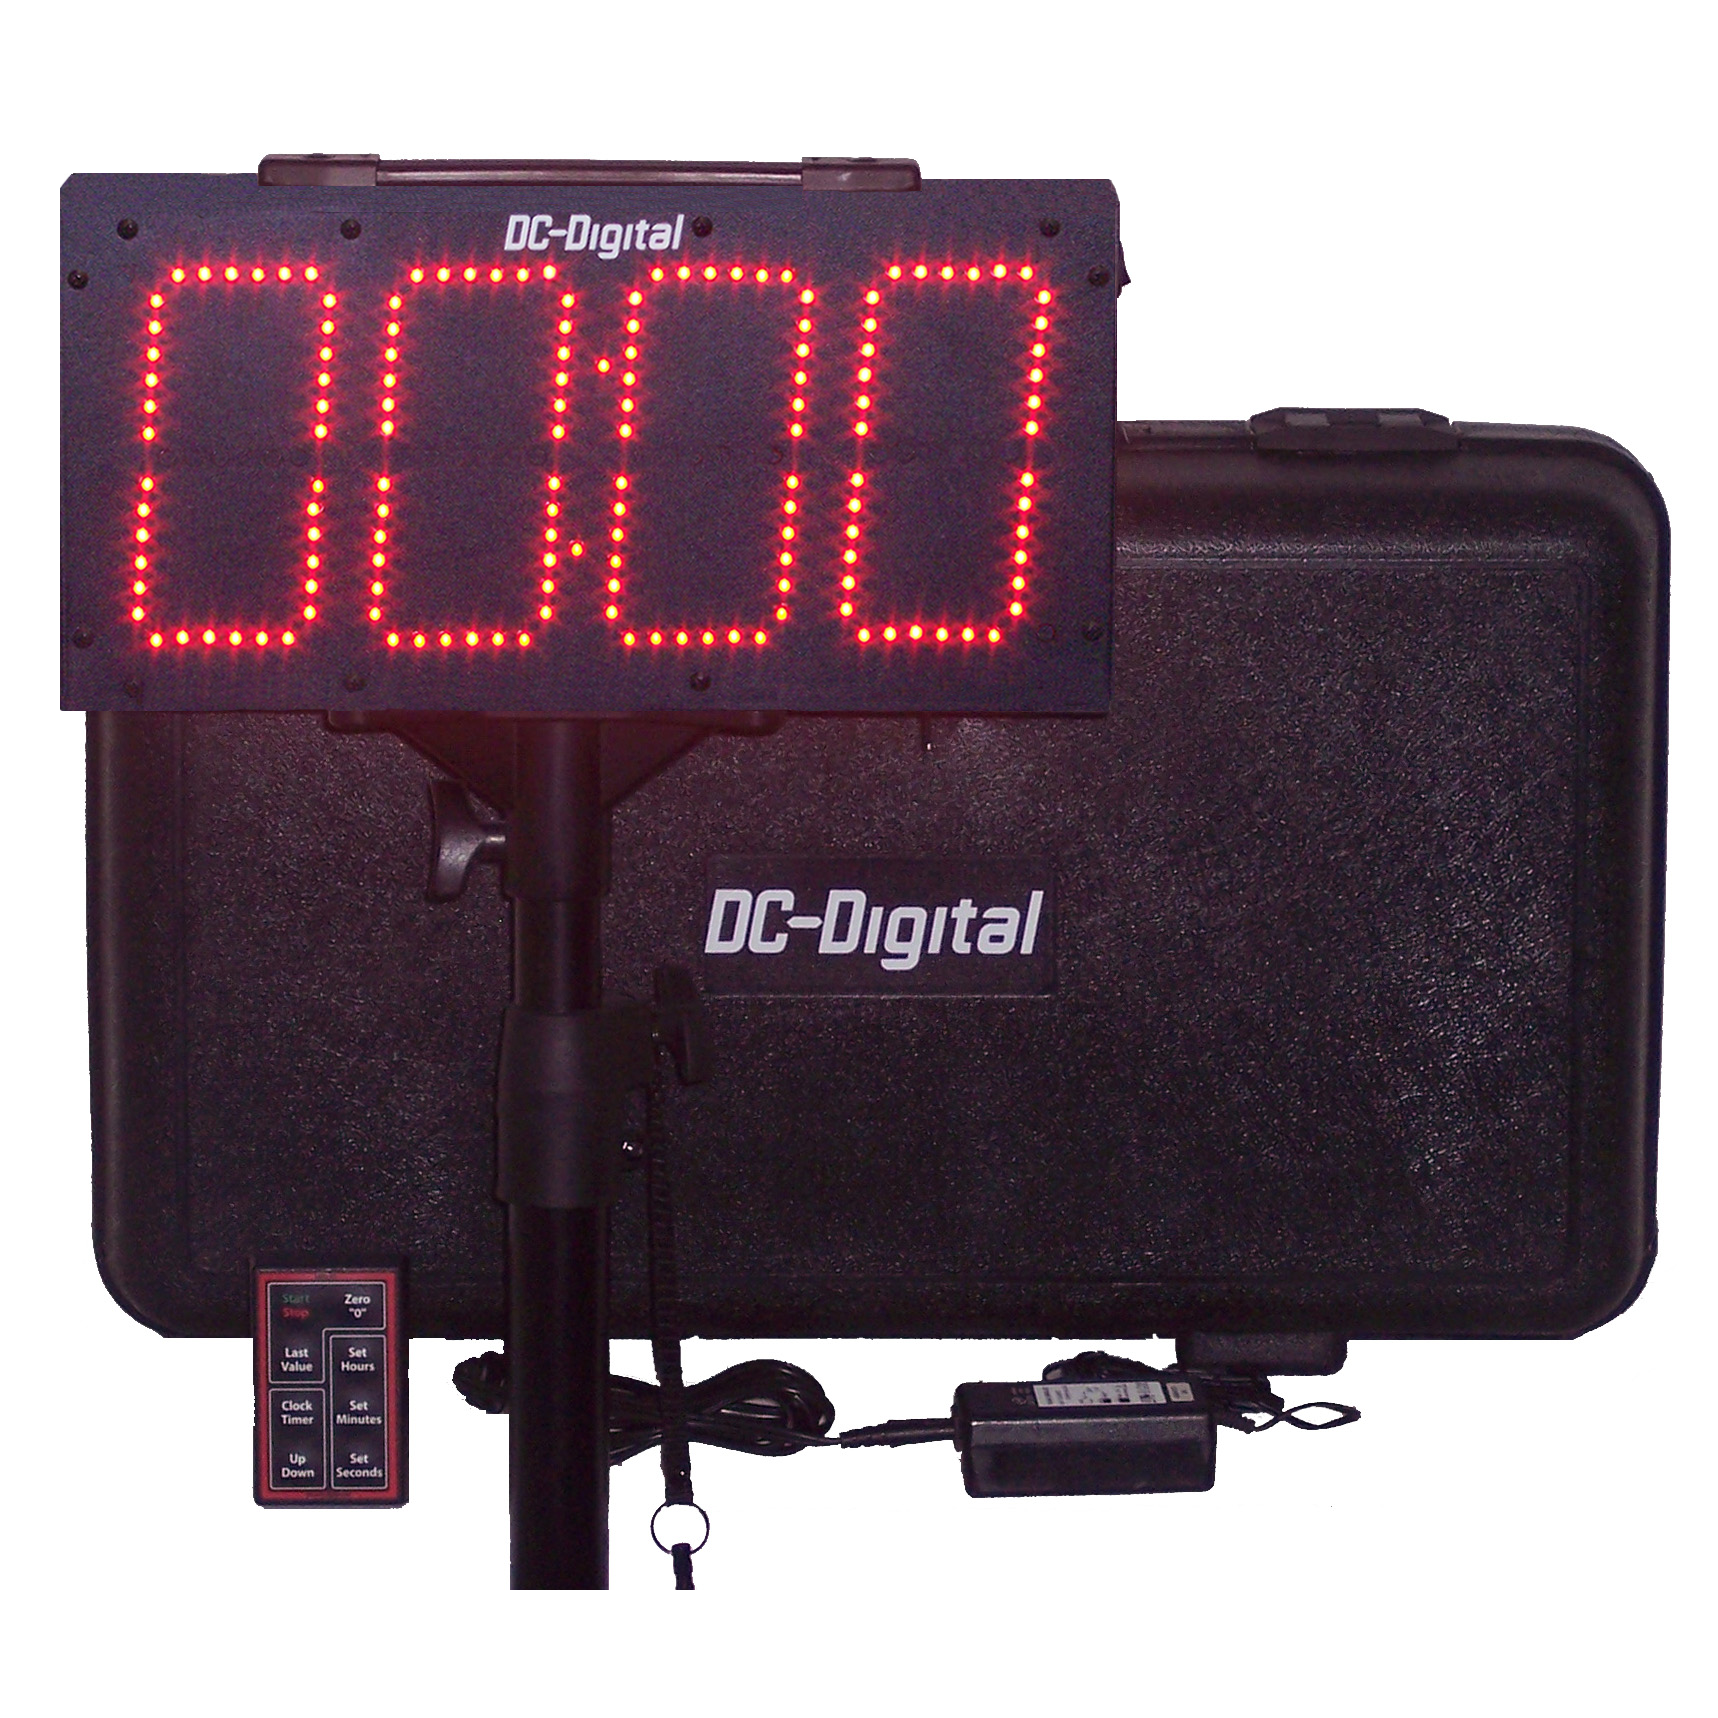 (DC-60UTW-BTC-R) Portable 6.0 Inch LED Digit, Multi-Function, Multipurpose Sport (Counts Up, Counts Down and Time of Day Clock), Battery Operated, Digital Timer-Clock with RF-Wireless Handheld Remote and Environmentally Sealed Push-Button Controlled , Carrying handle, Carrying Case, Tripod with Mount and Battery Charger (INDOOR/OUTDOOR)